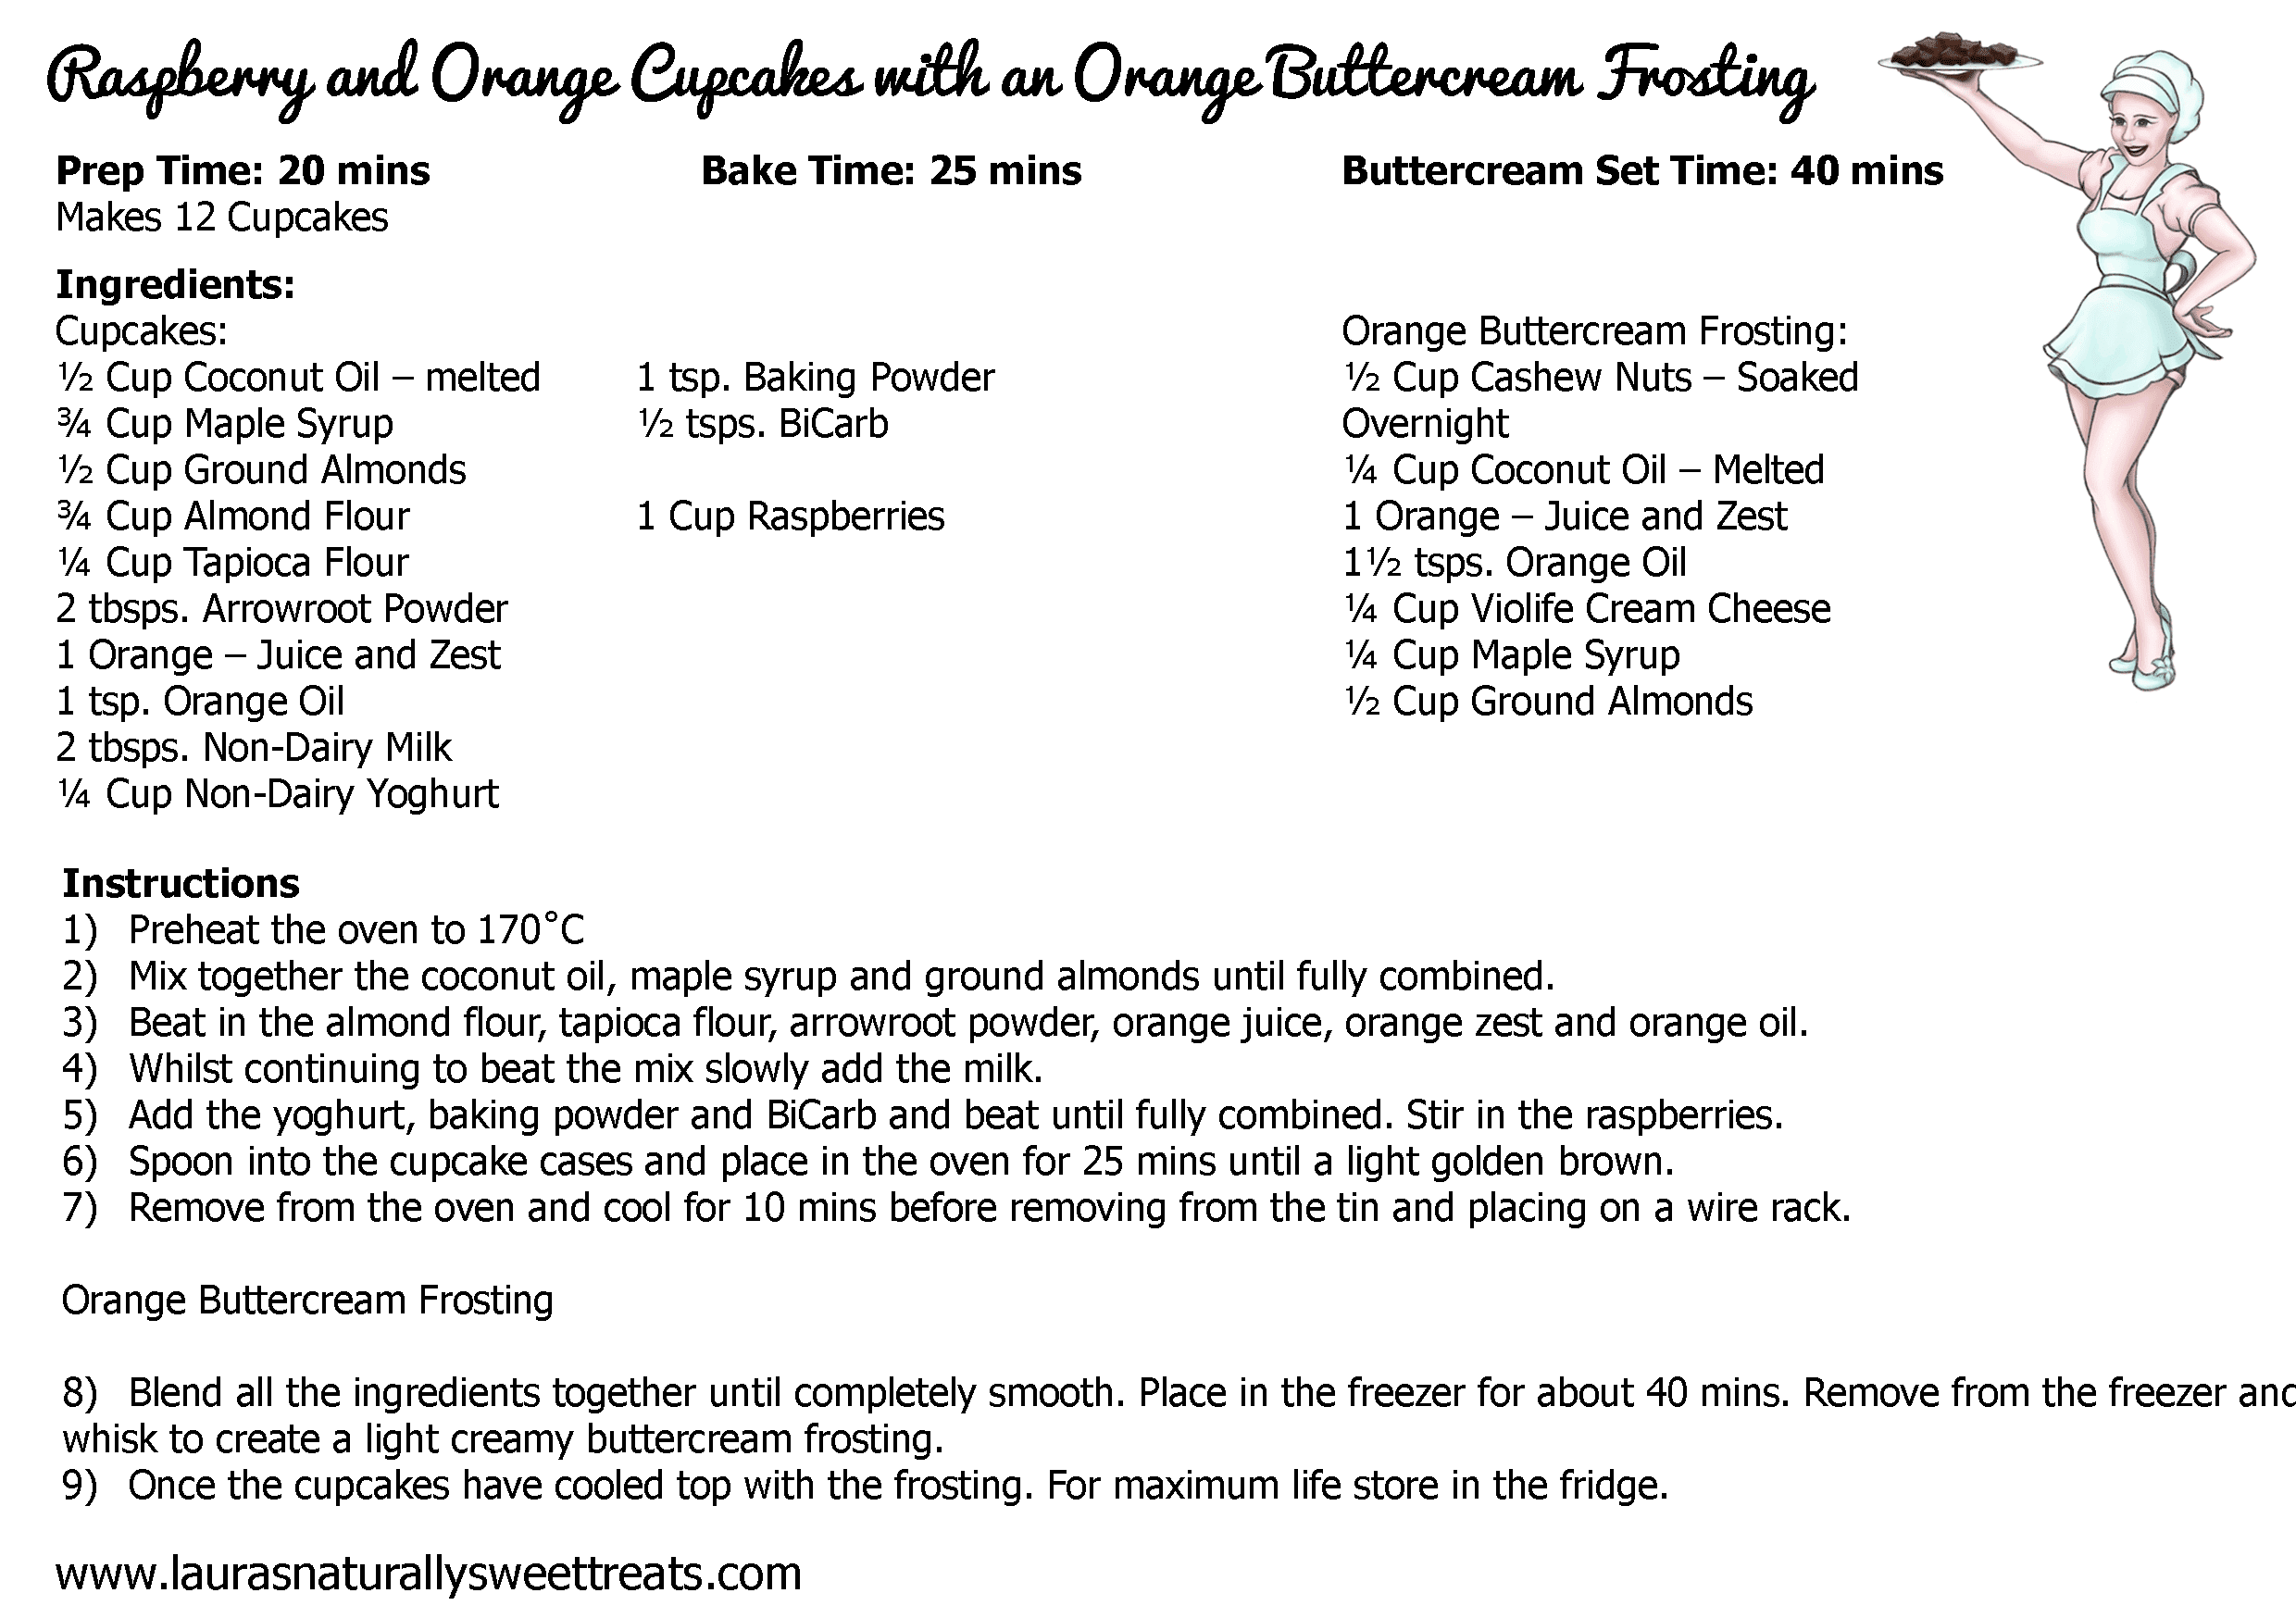 raspberry and orange cupcakes with an orange buttercream frosting recipe card